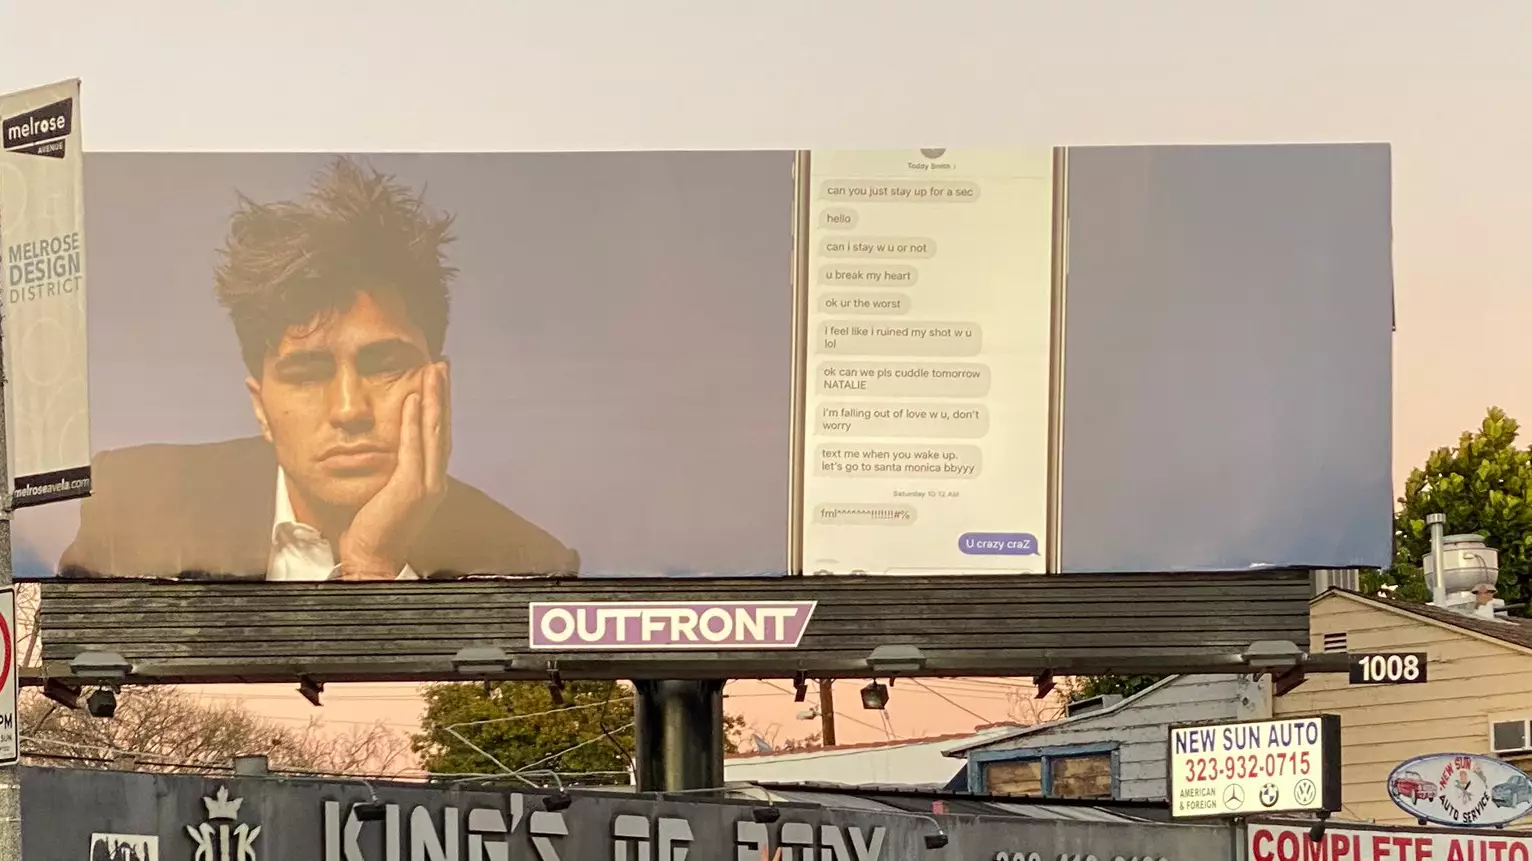 YouTuber Puts Up Billboard Of His Friend's Drunken Texts To His Assistant